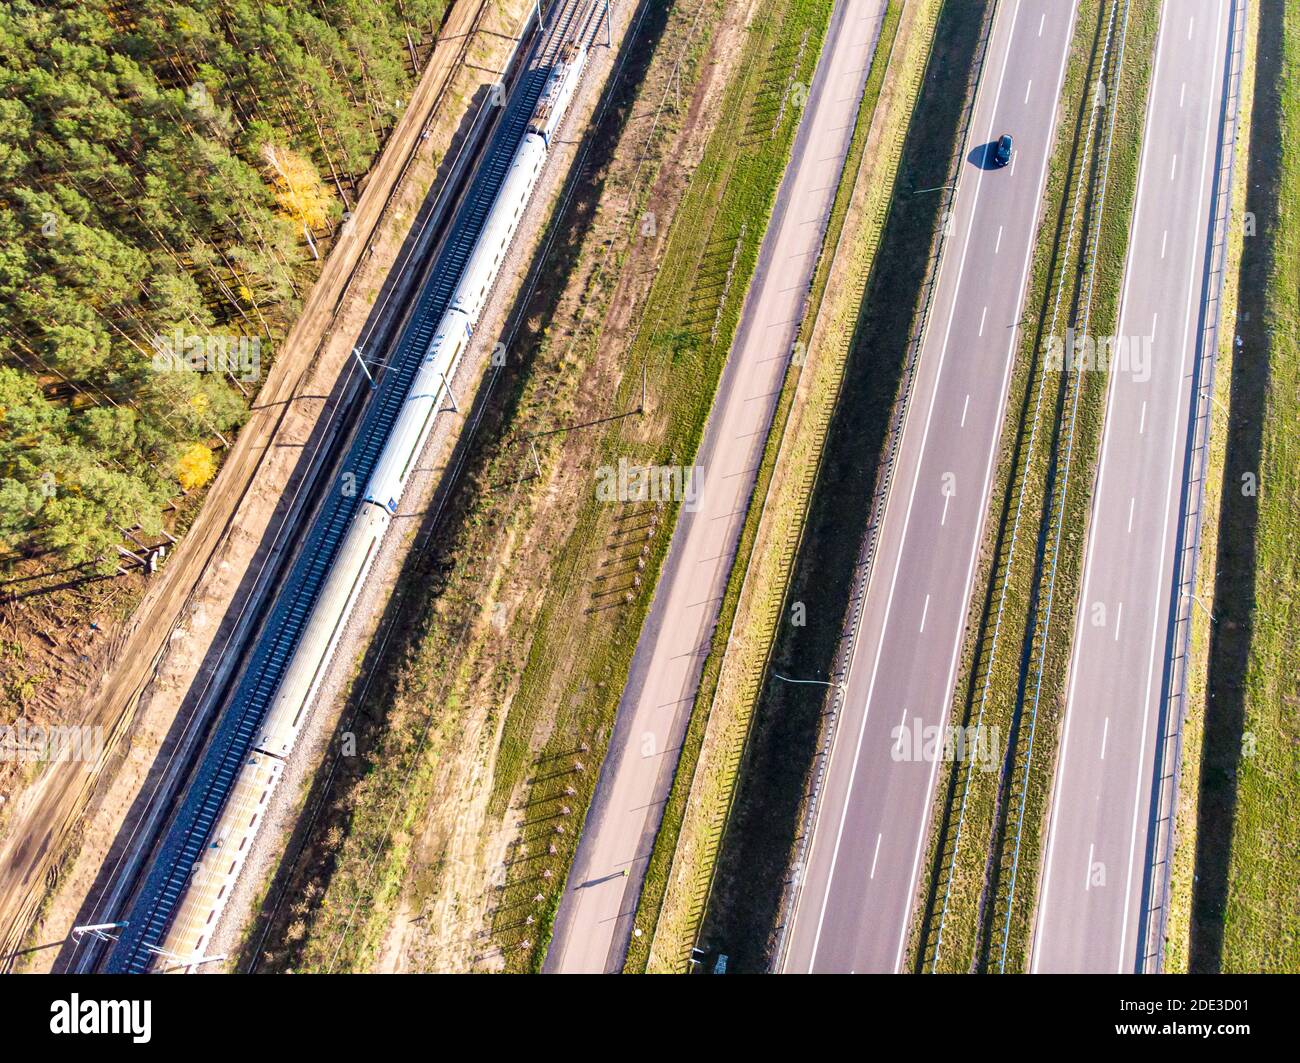 Four lanes of the expressway, the inner lane and the tracks, seen from a bird's perspective Stock Photo